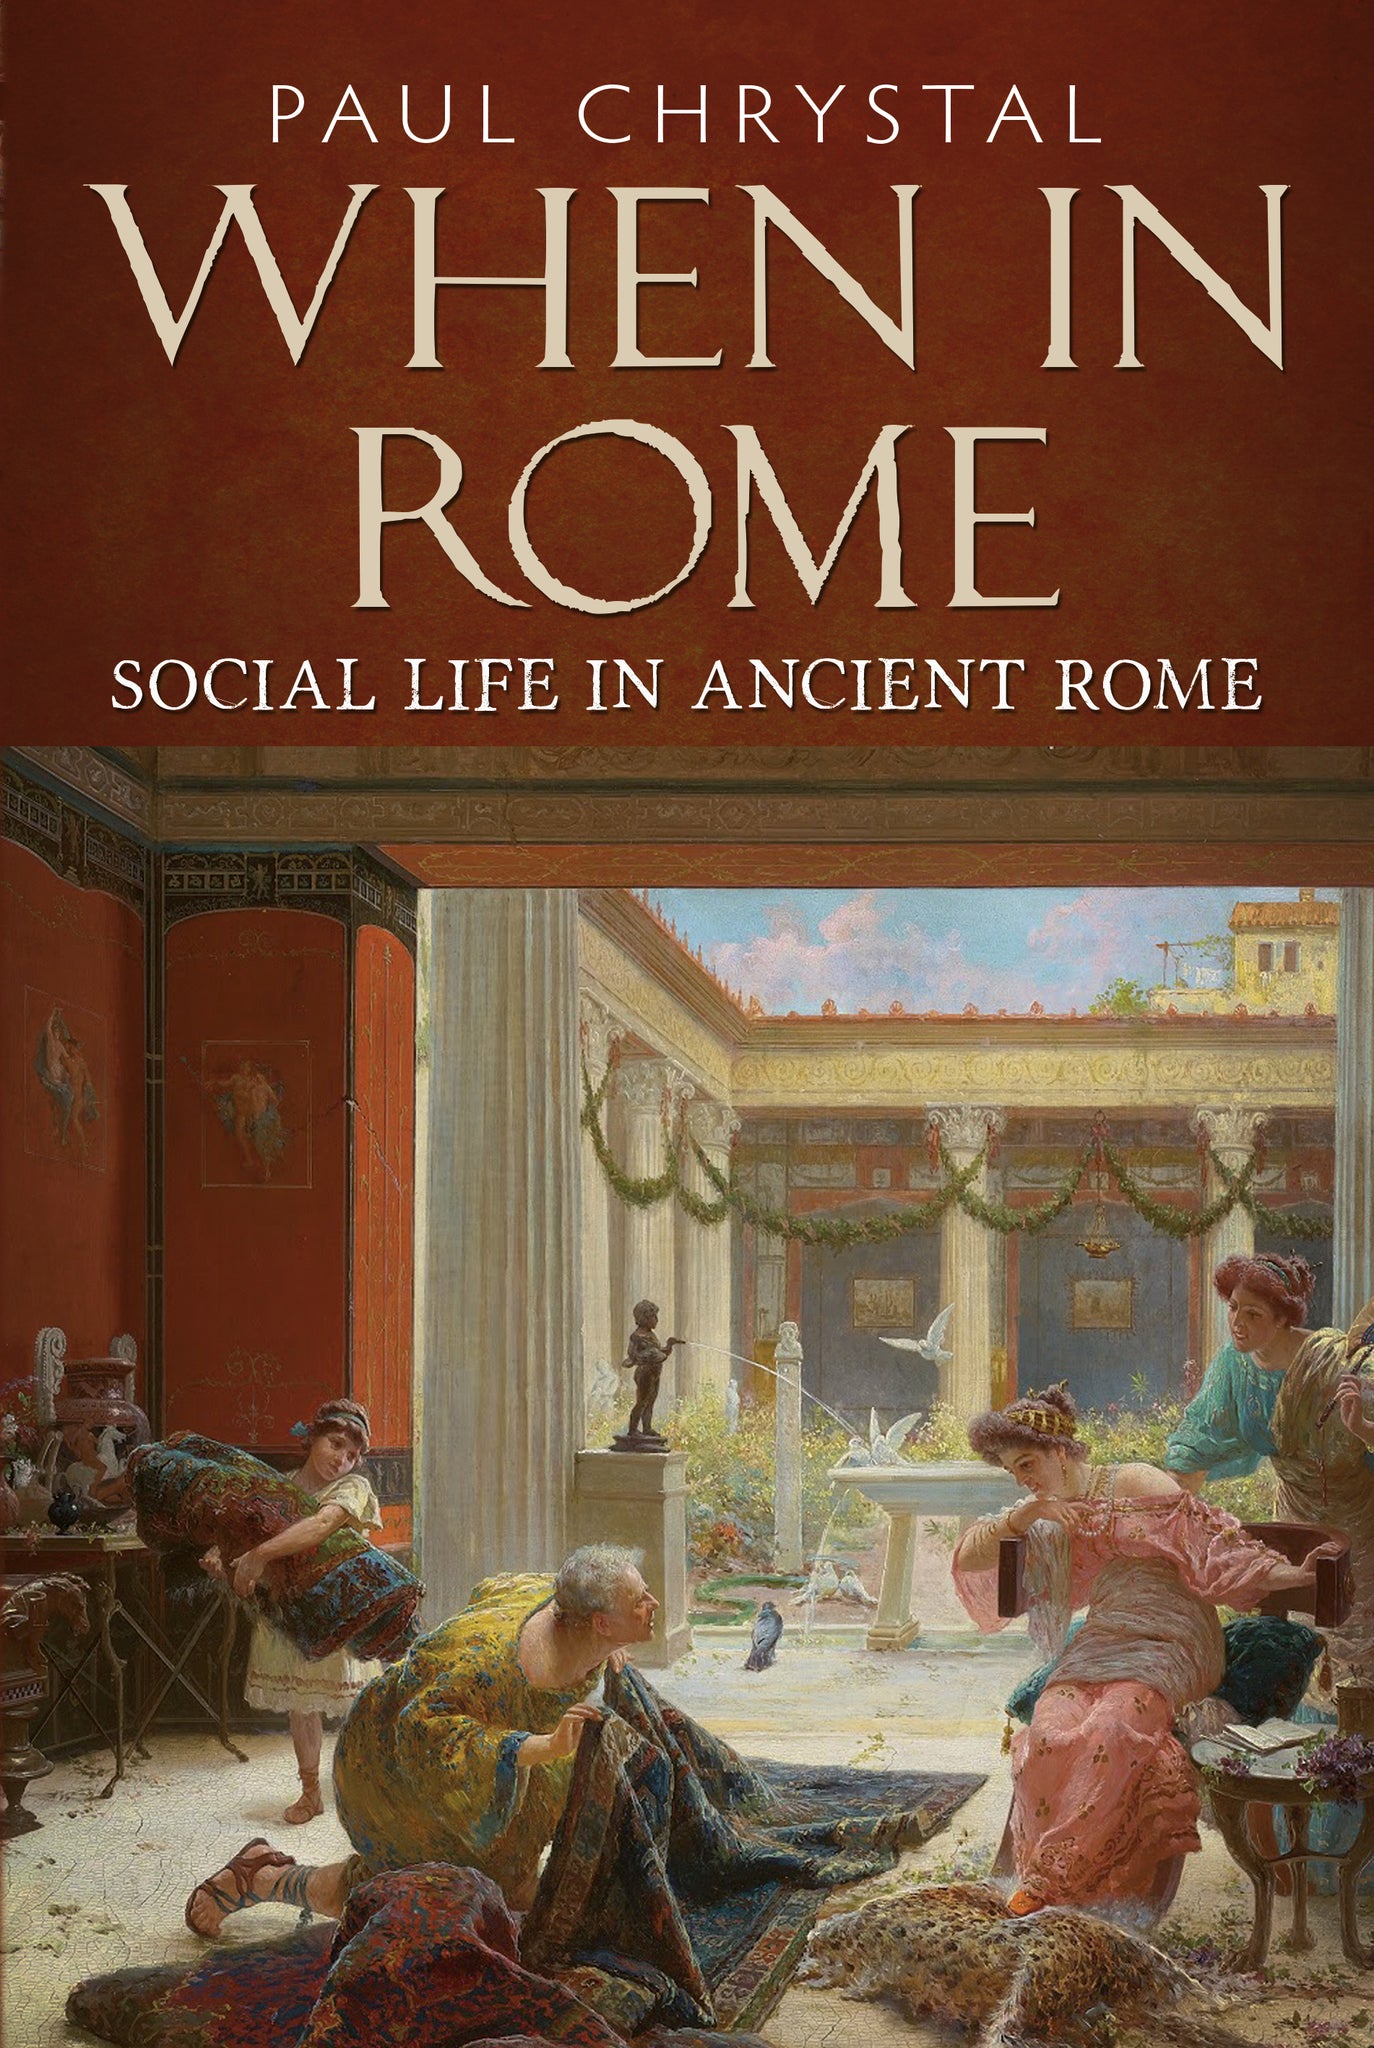 When in Rome: Social Life in Ancient Rome